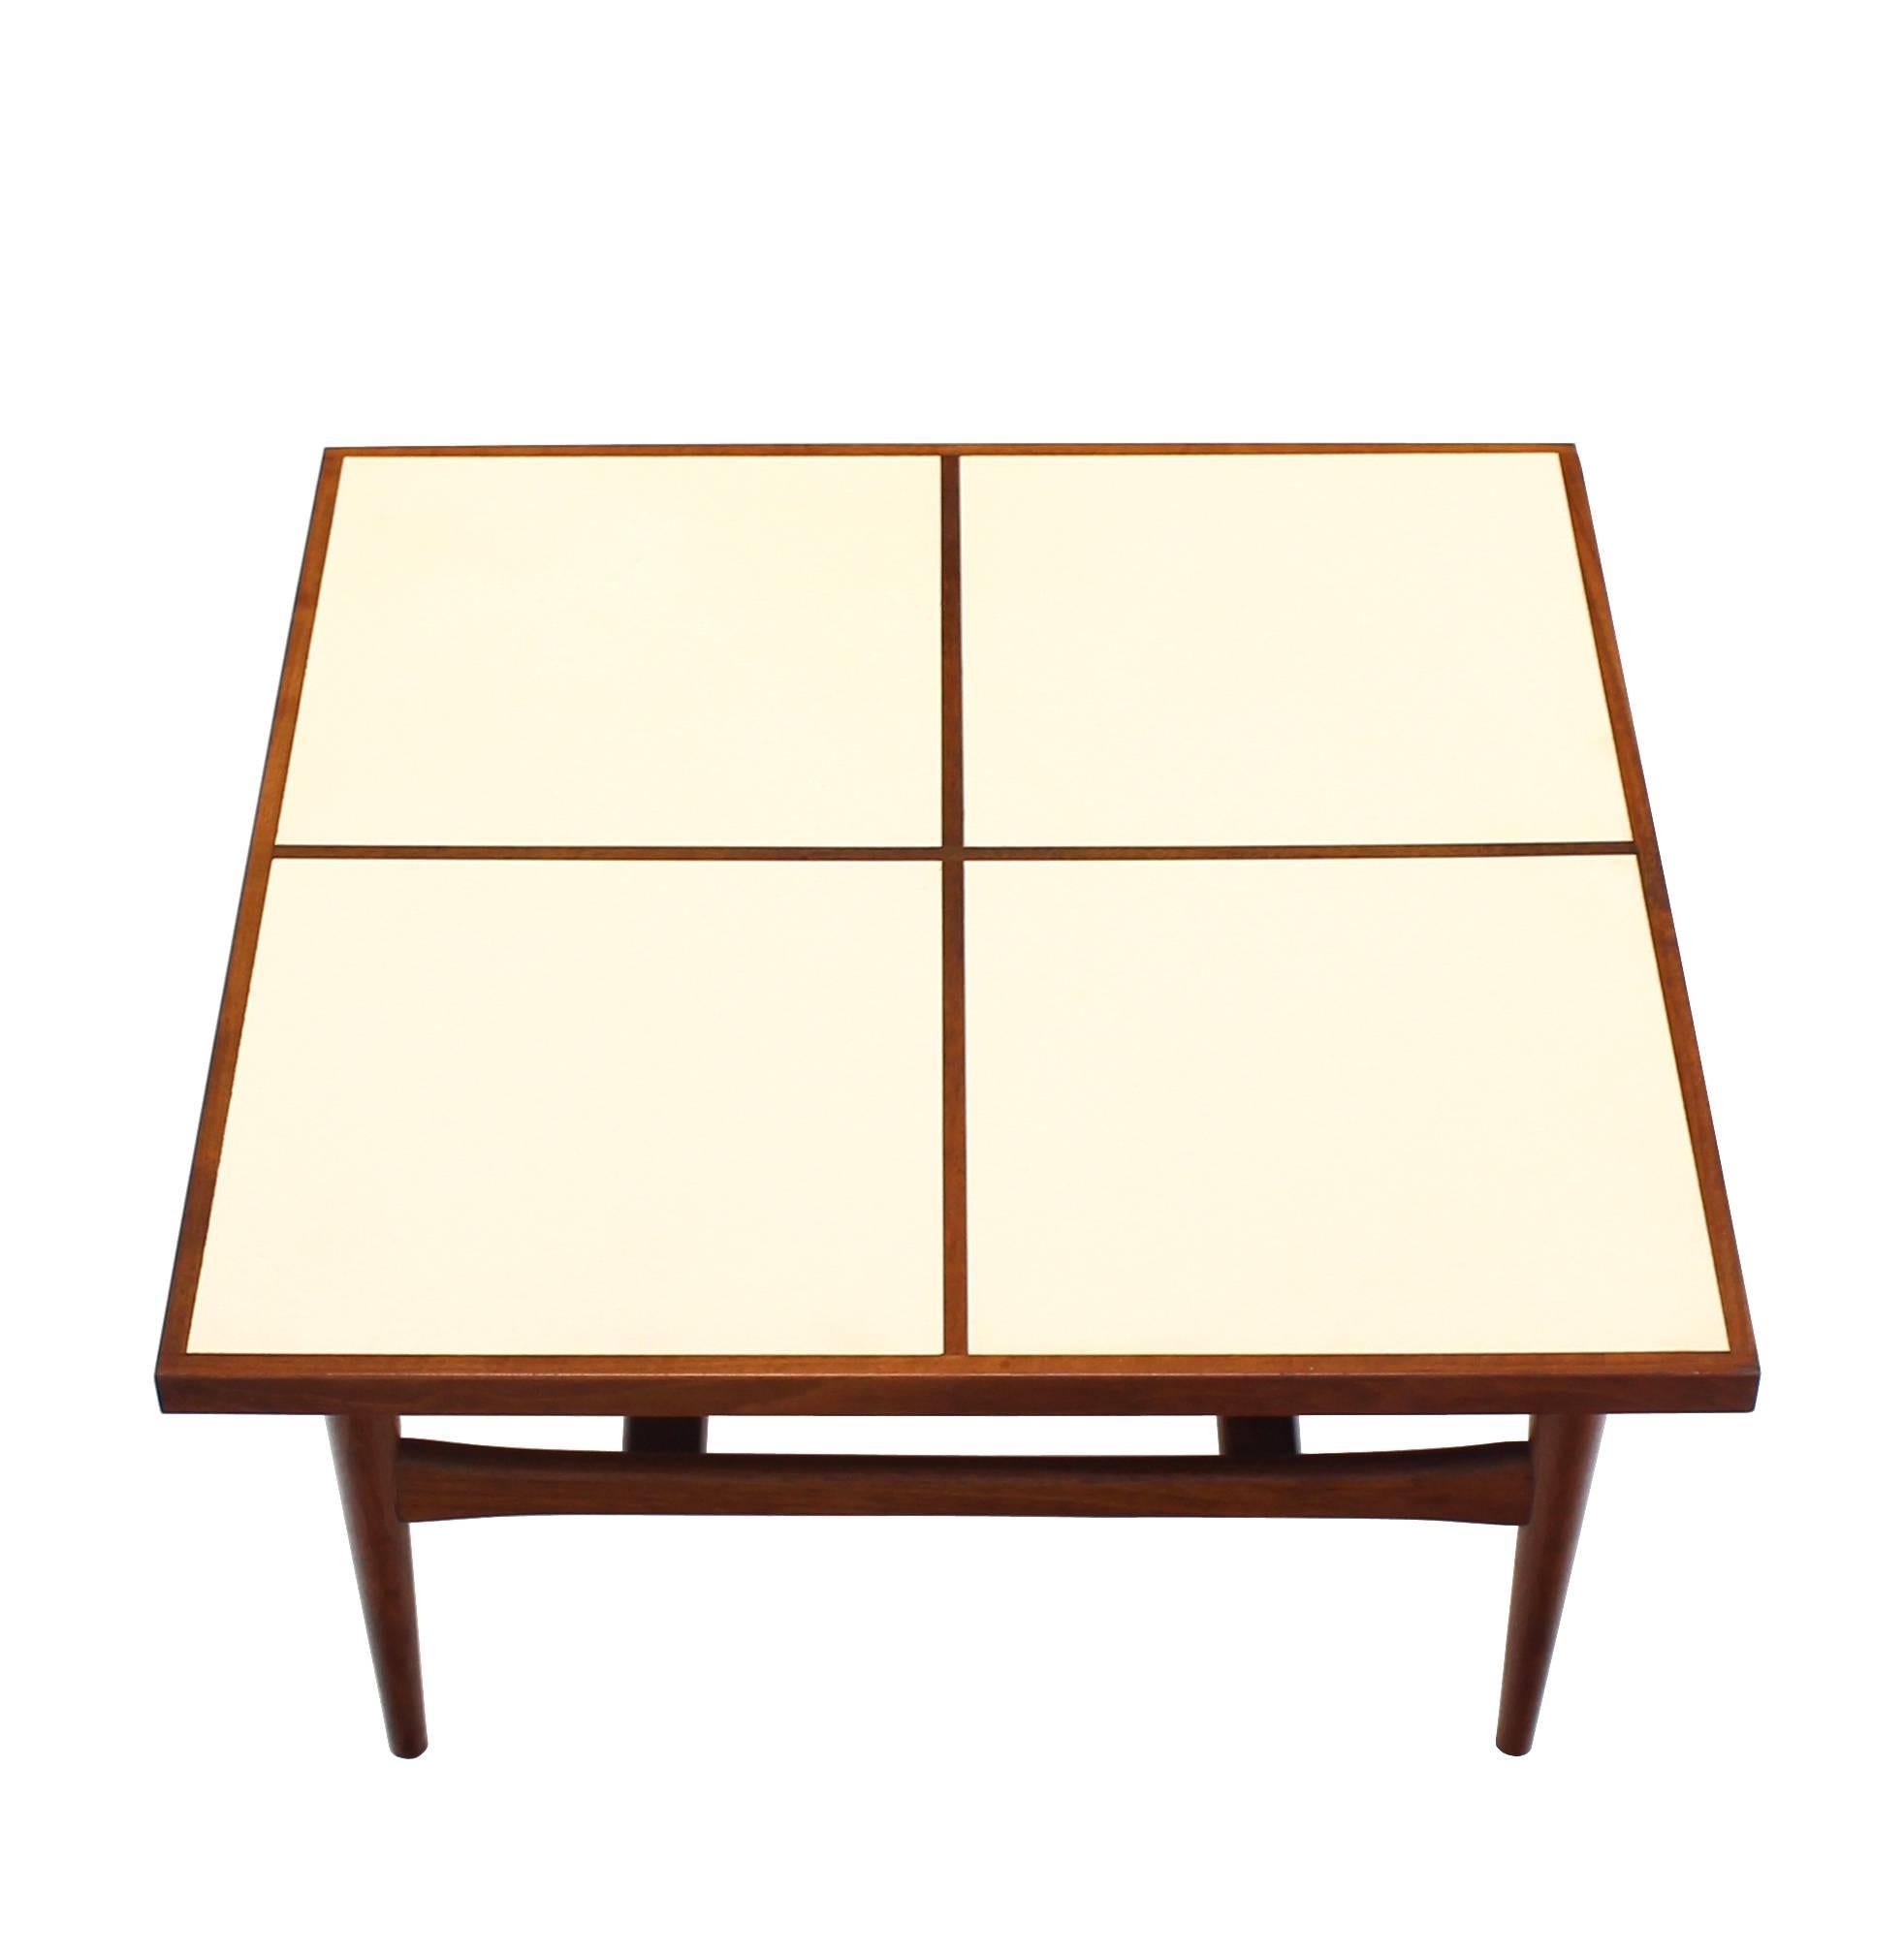 American Mid-Century Modern Square Coffee Table For Sale